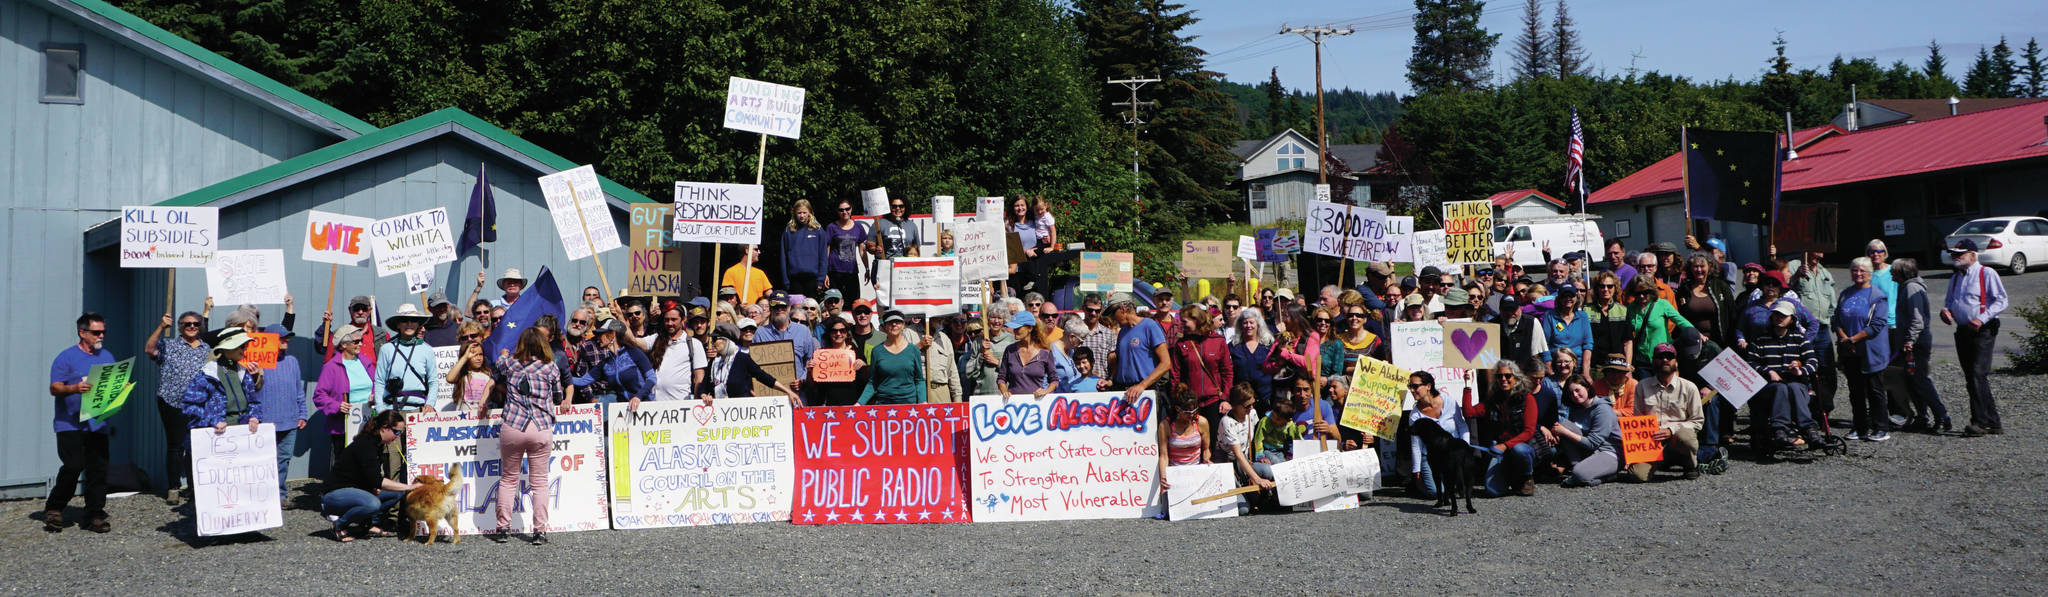 Demonstrators line up for a group photo on Sunday, July 28, 2019, outside the Legislative Information Office after a rally against Gov. Mike Dunleavy’s budget cuts in Homer, Alaska. (Photo by Michael Armstrong/Homer News)